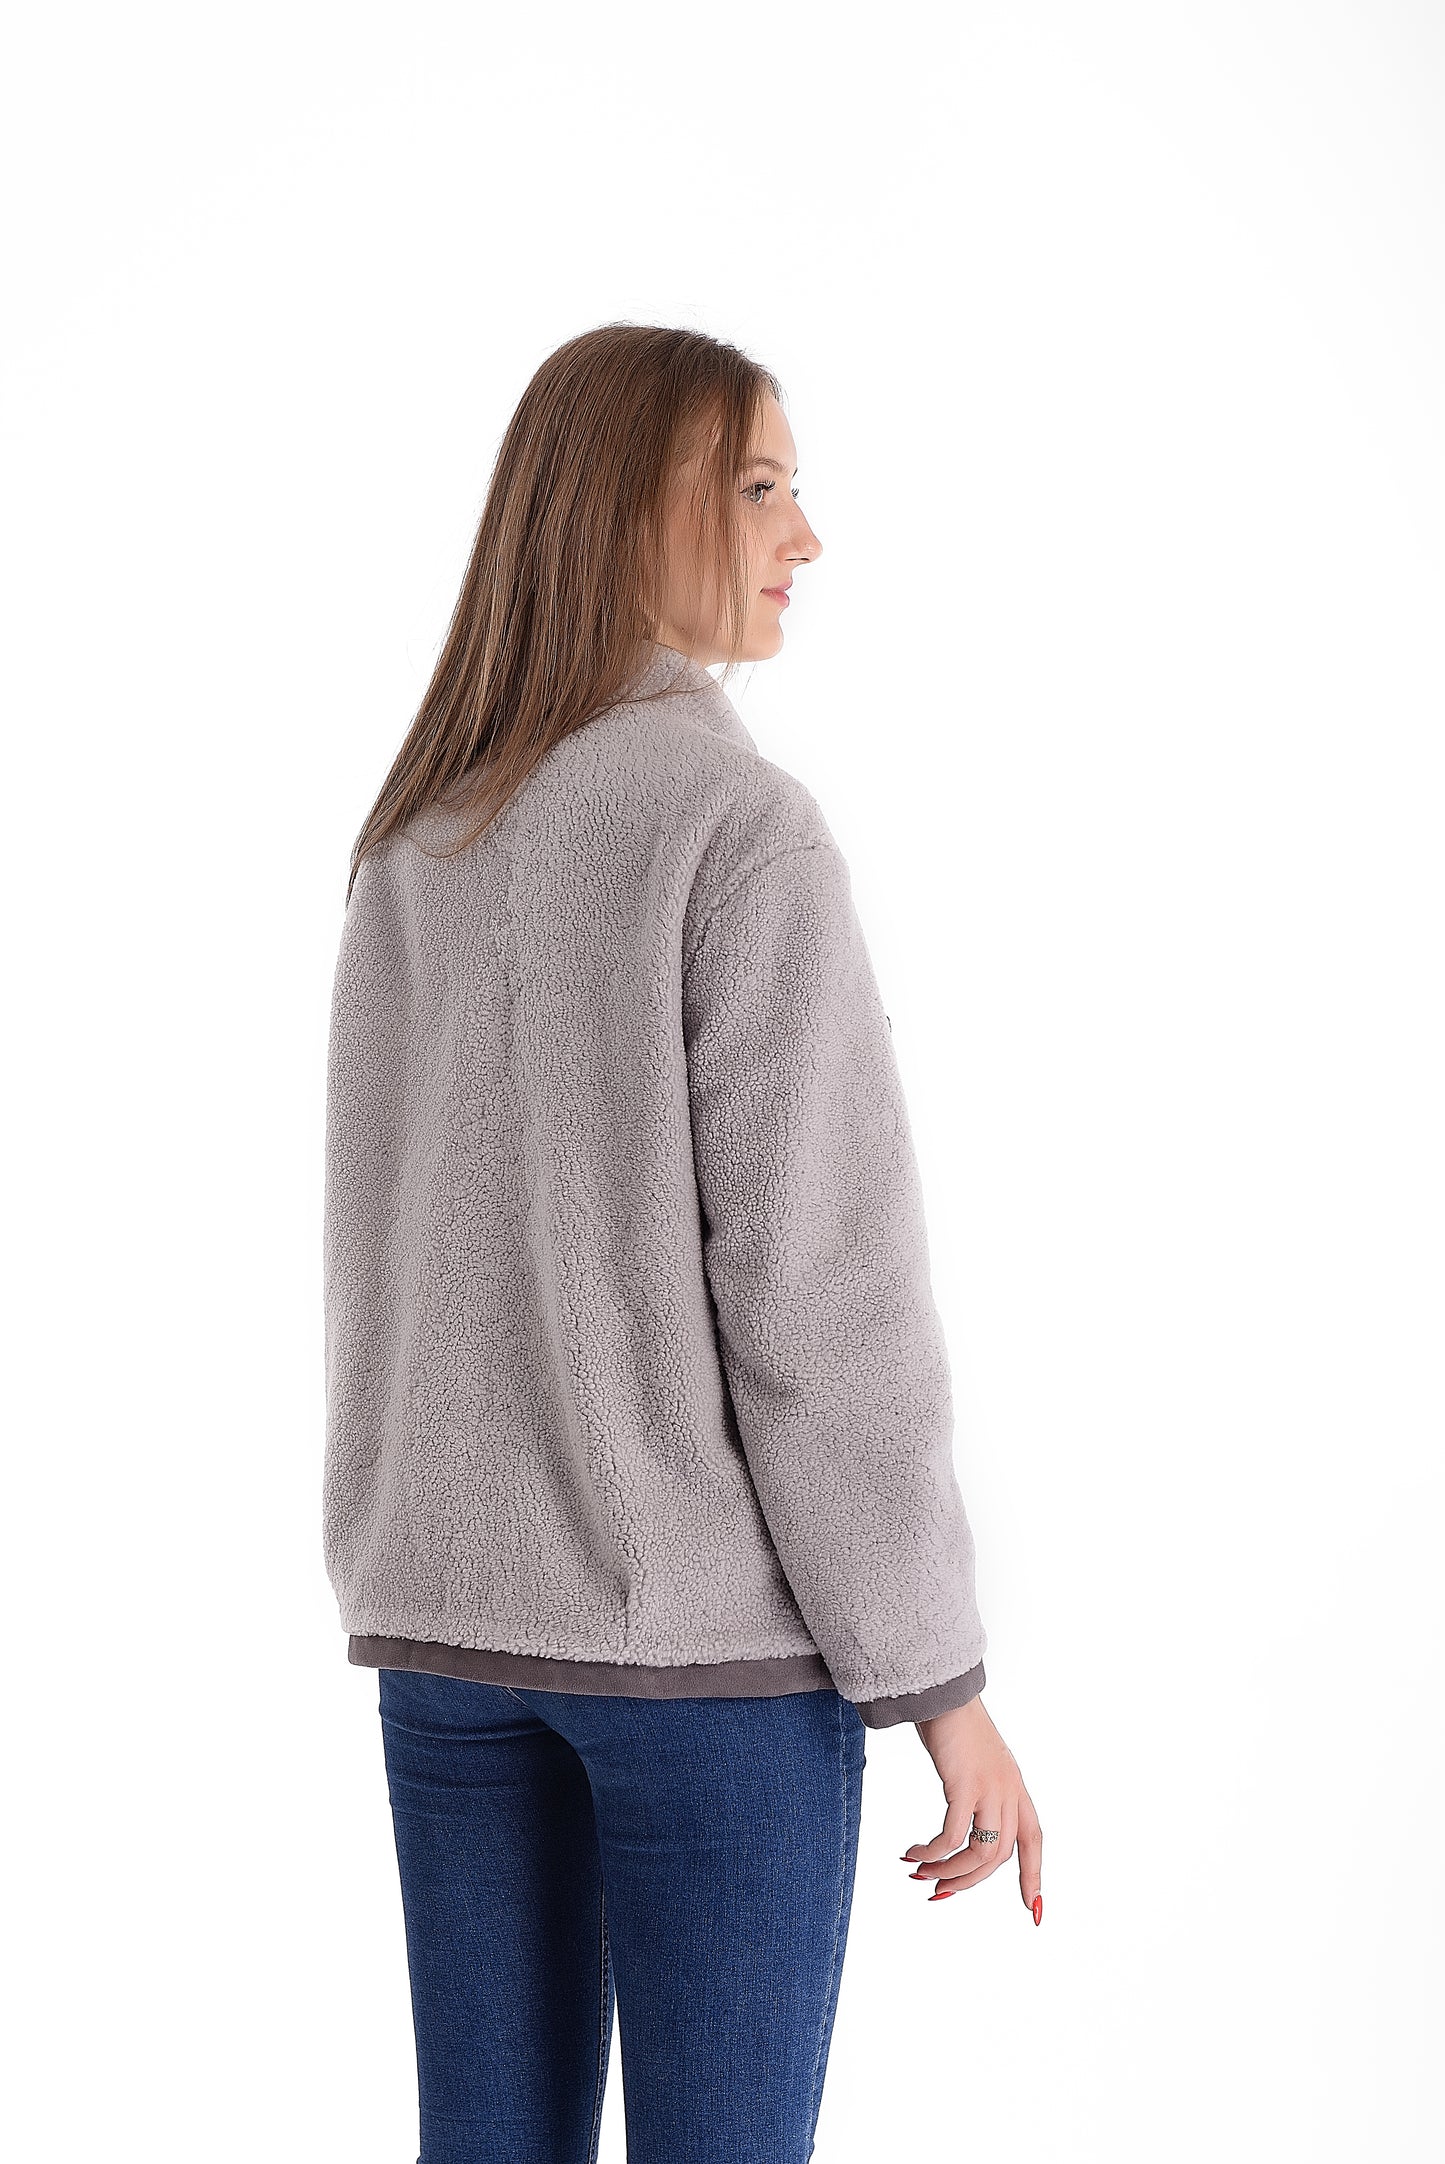 Lightweight Short Sheepskin Jacket in Grey Color with Boucle Sheepskin and Suede Leather Inserts